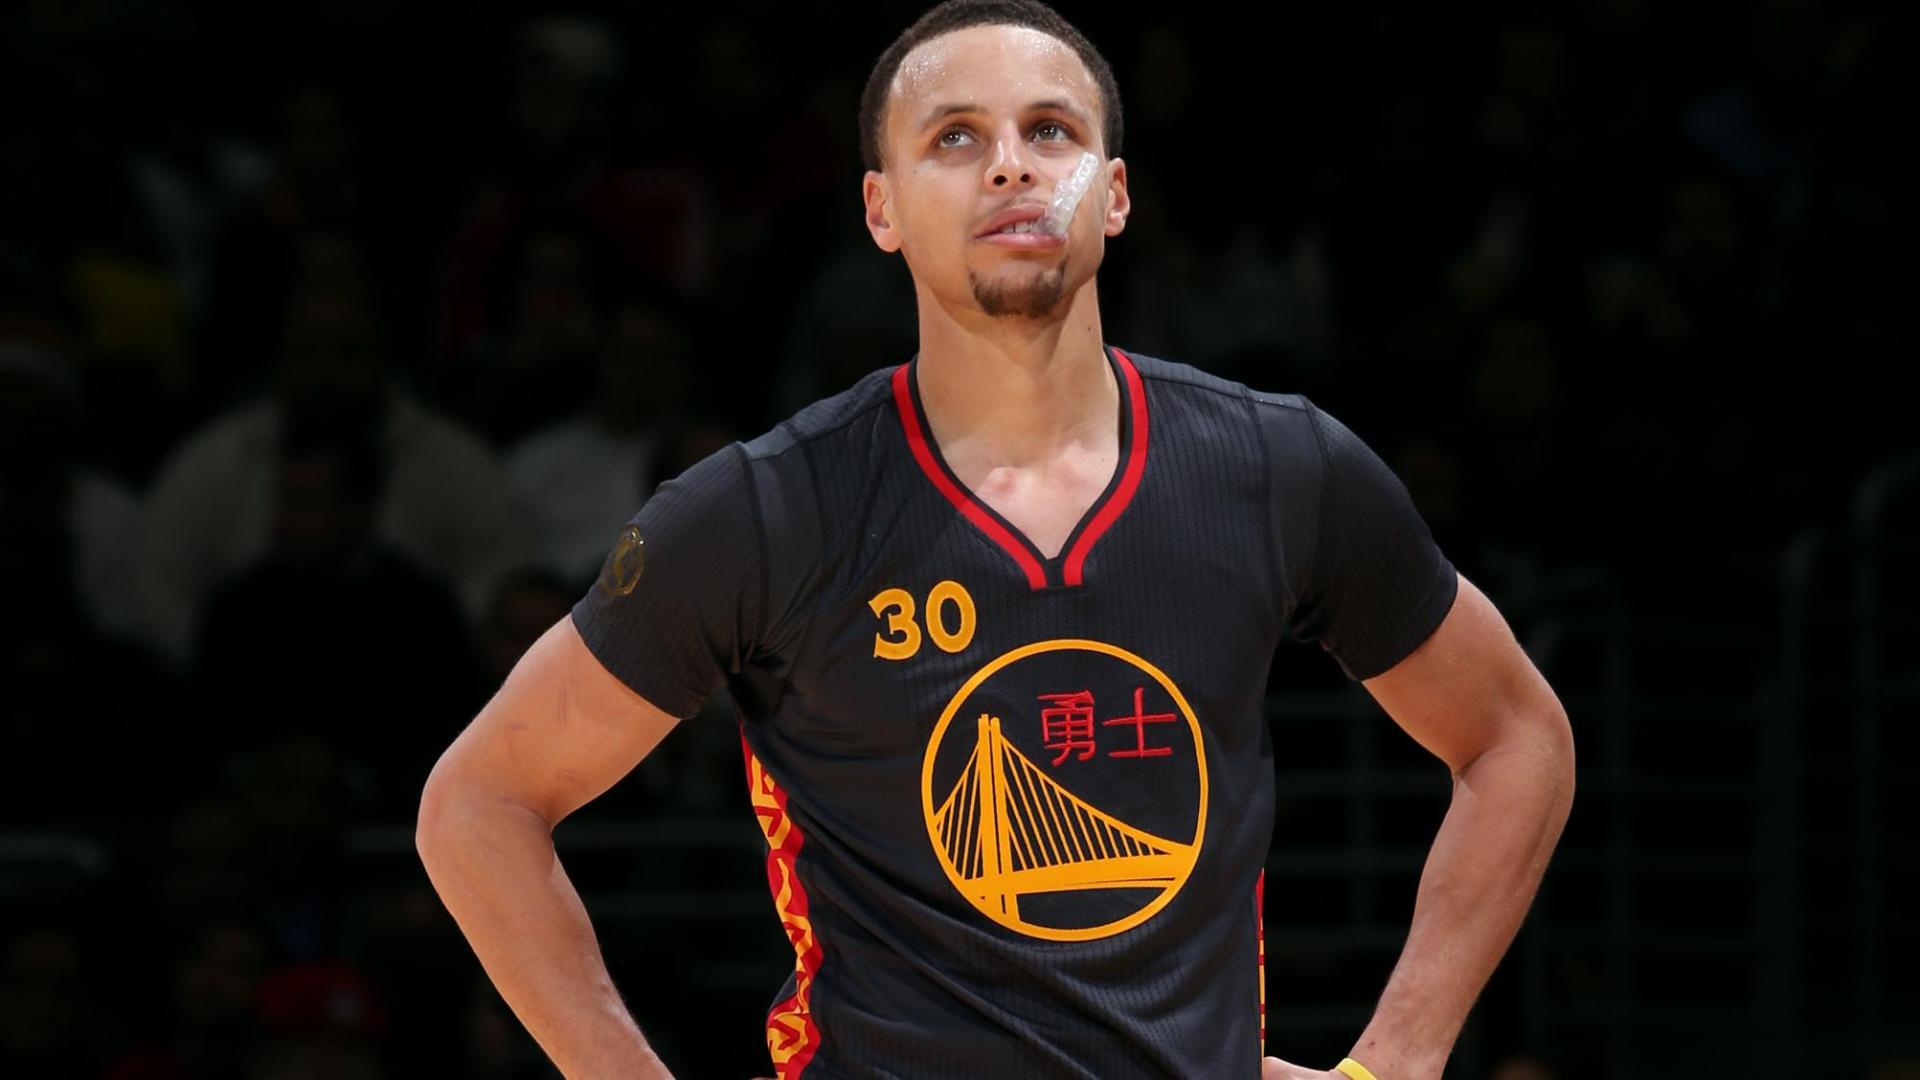 Stephen Curry Wallpaper Image Photos Pictures Background